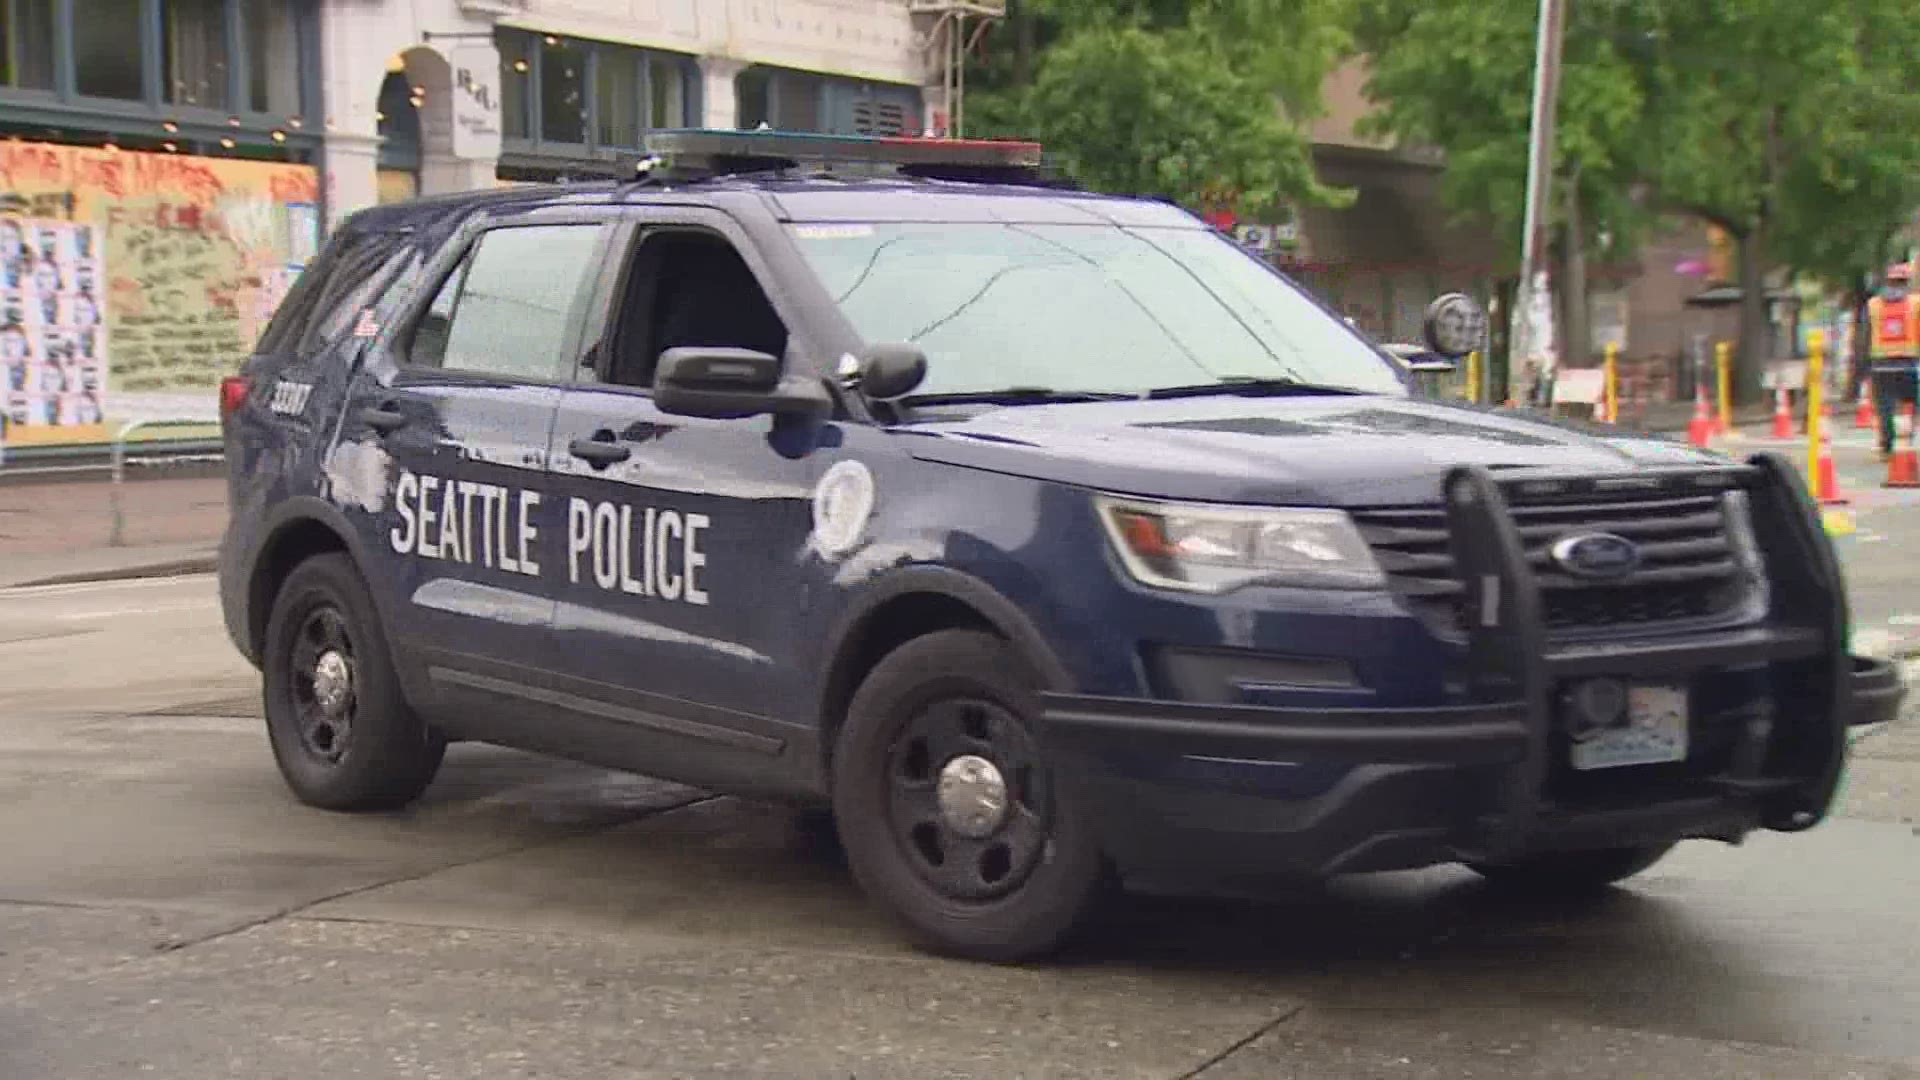 The budget line item would eliminate 101 sworn officer positions currently open with the Seattle Police Department, which would have saved $19 million.